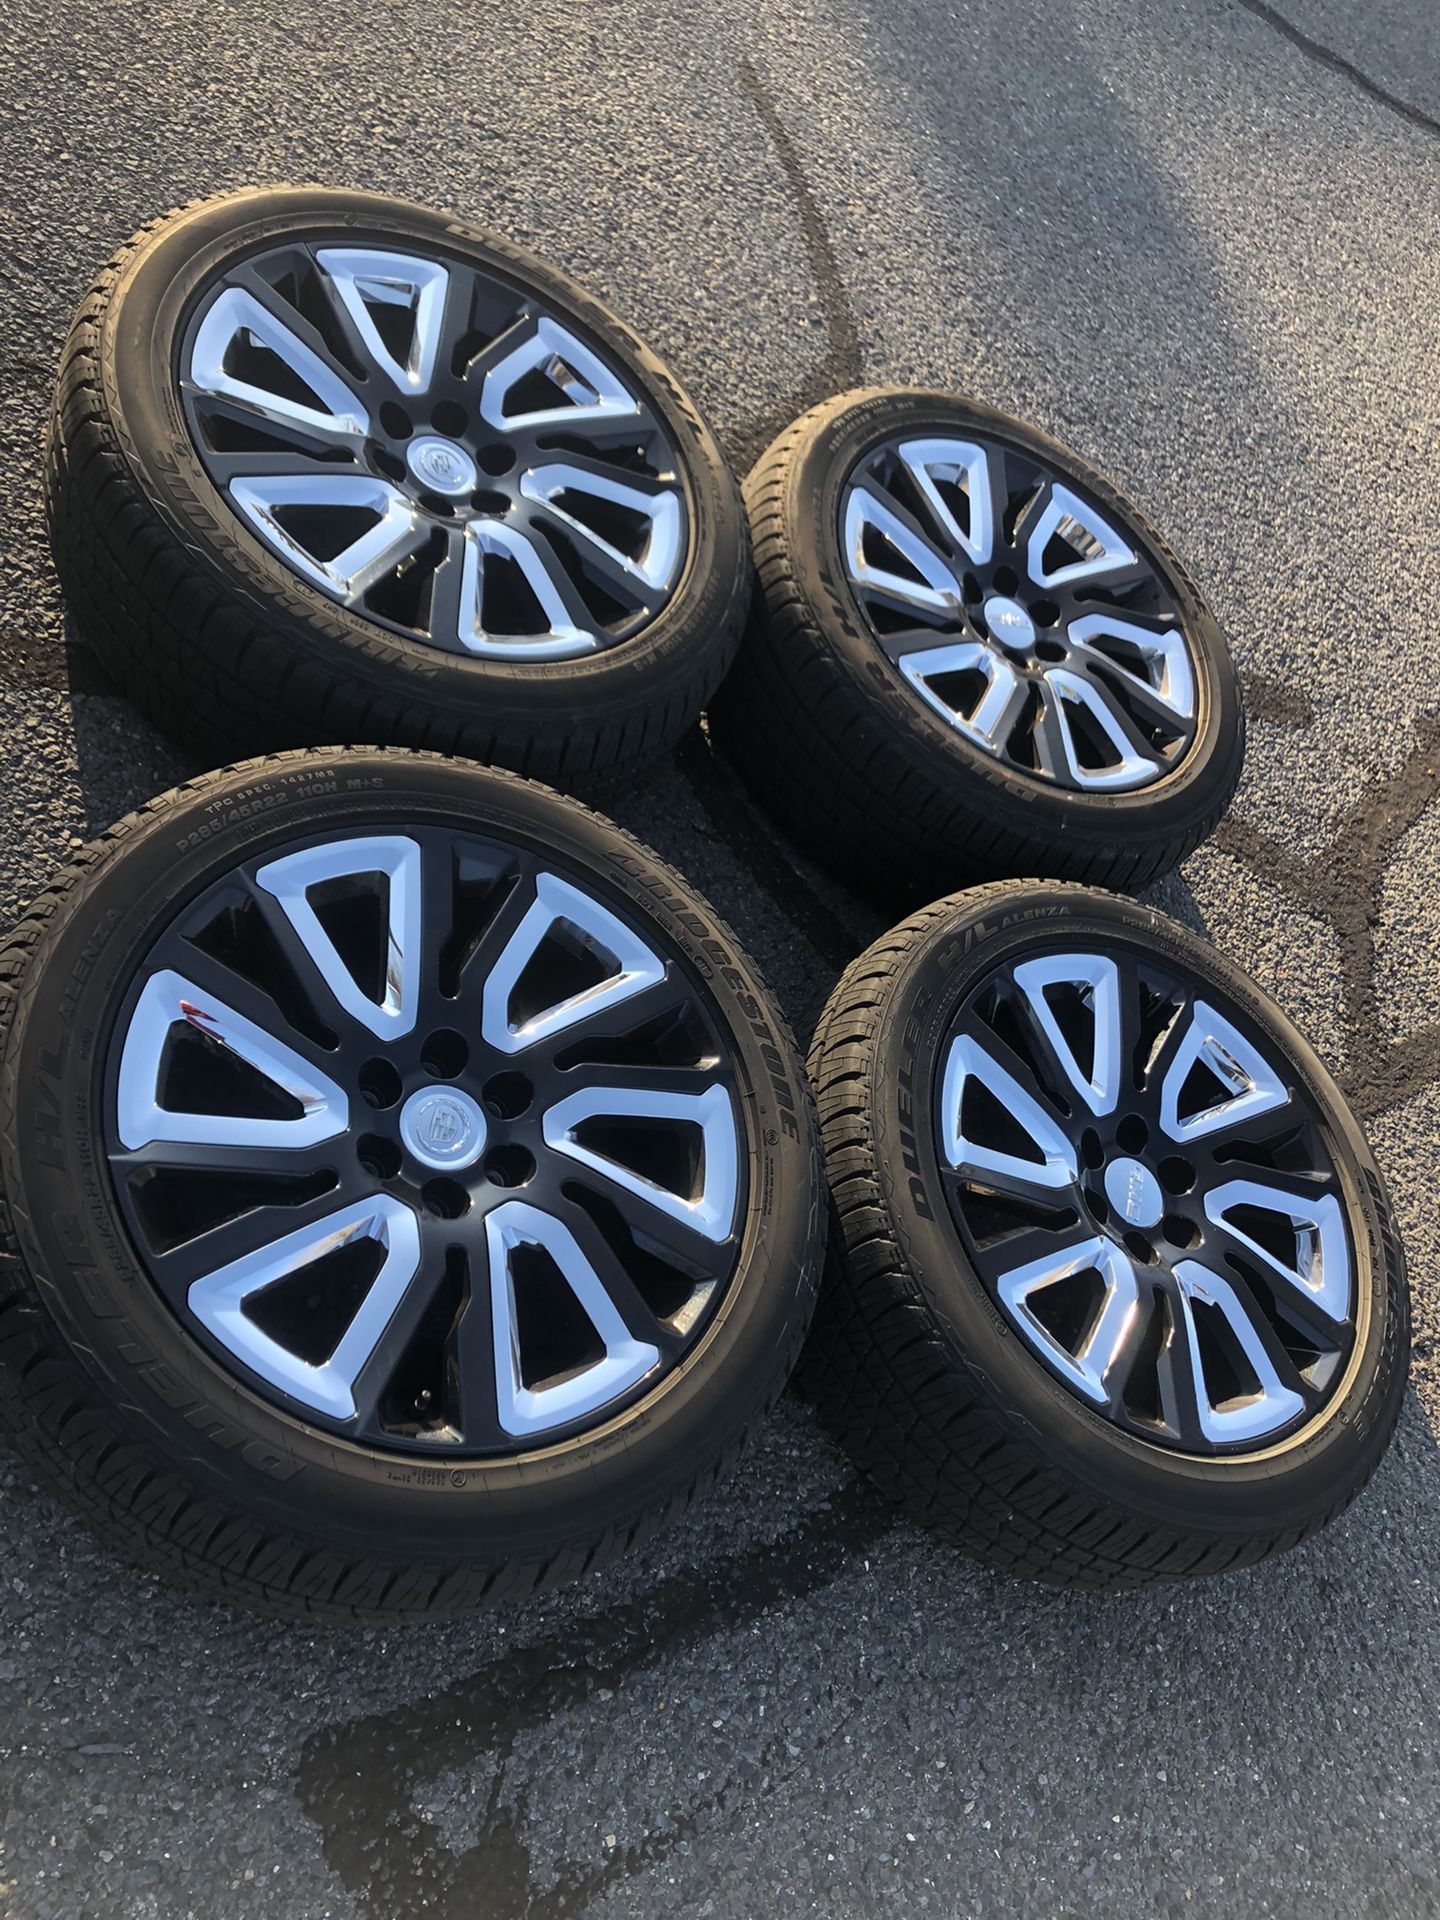 22” gmc / Chevrolet wheels and tires